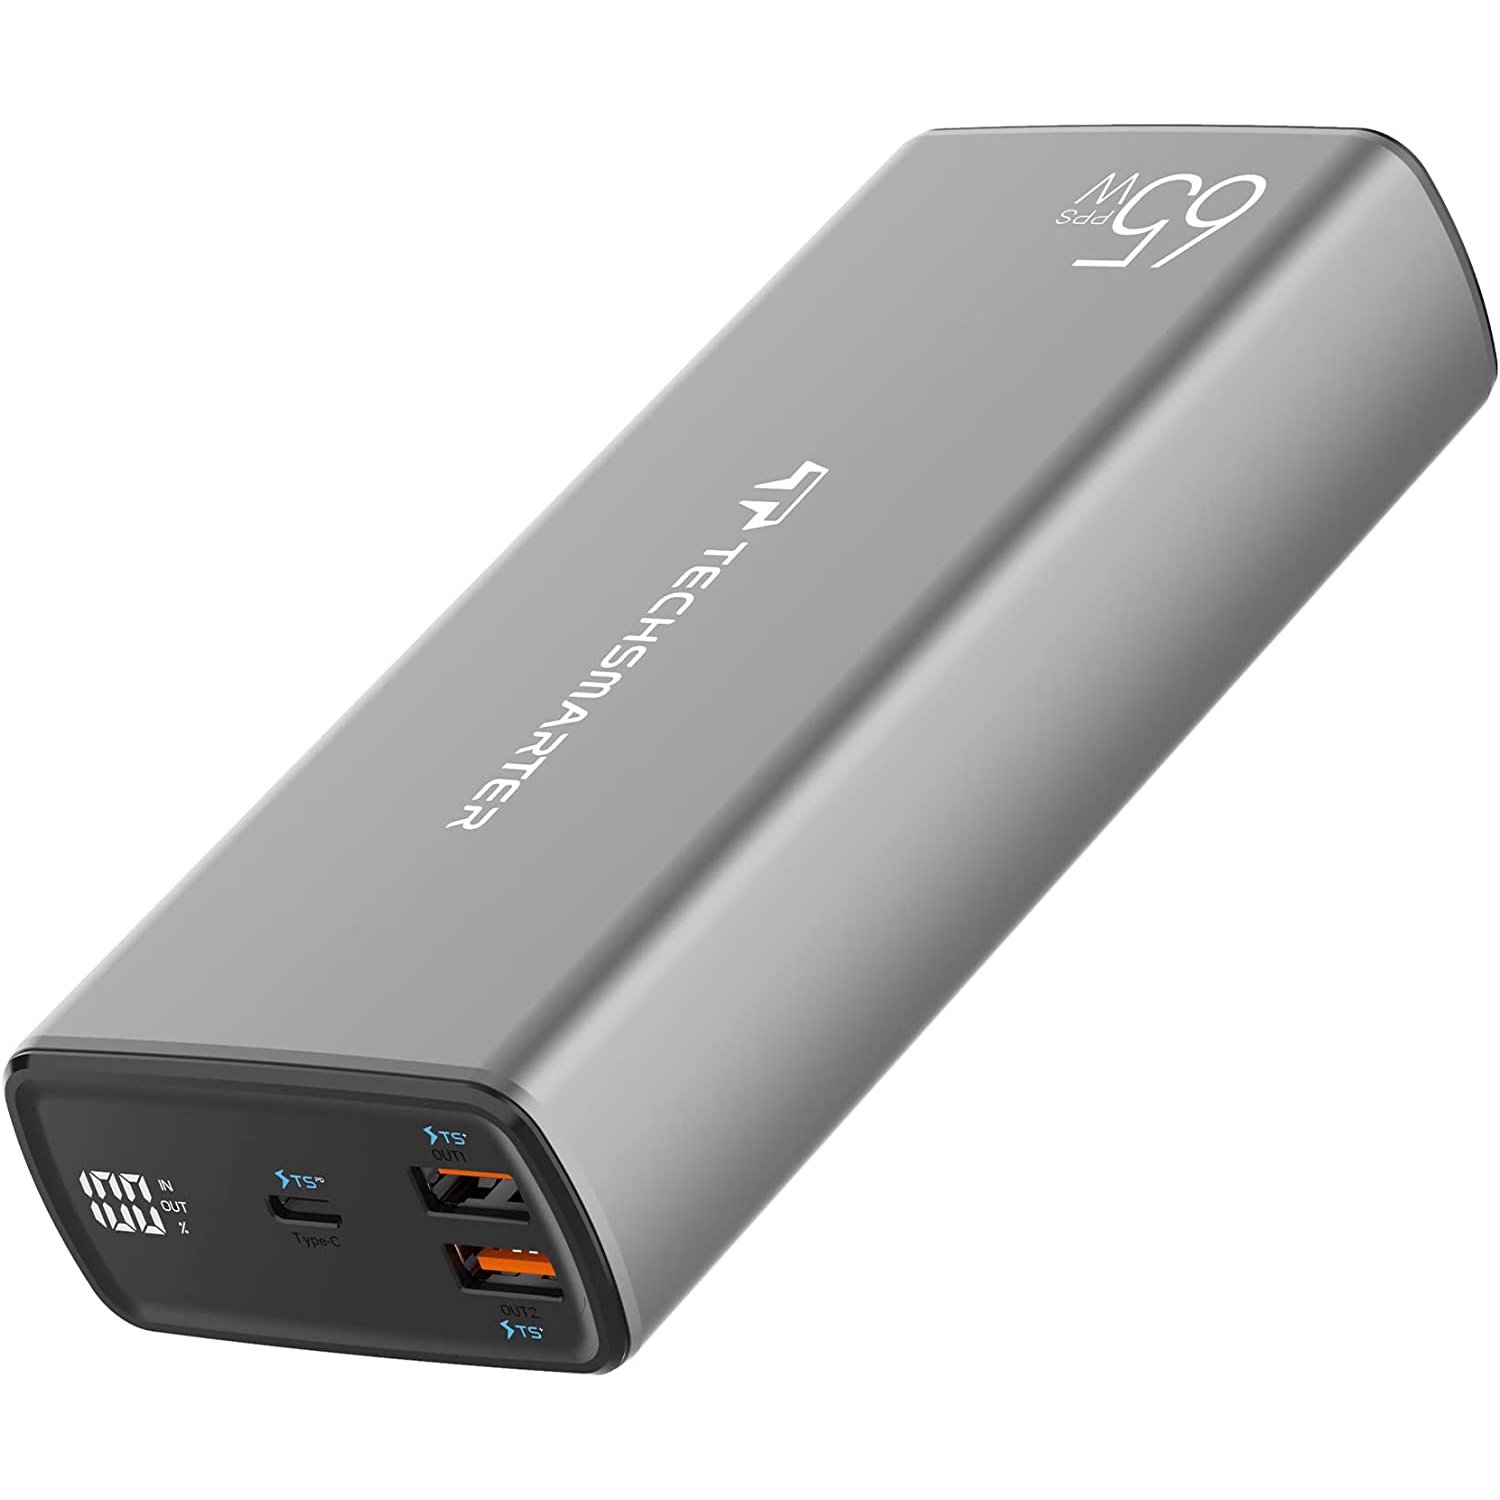 Techsmarter 30000mah 65W PPS USB-C PD Power Bank with Samsung Super Fast Charging, Laptop Portable Charger Compatible with iPhone, Samsung Galaxy, Androids, iPad, MacBook Air/Pro